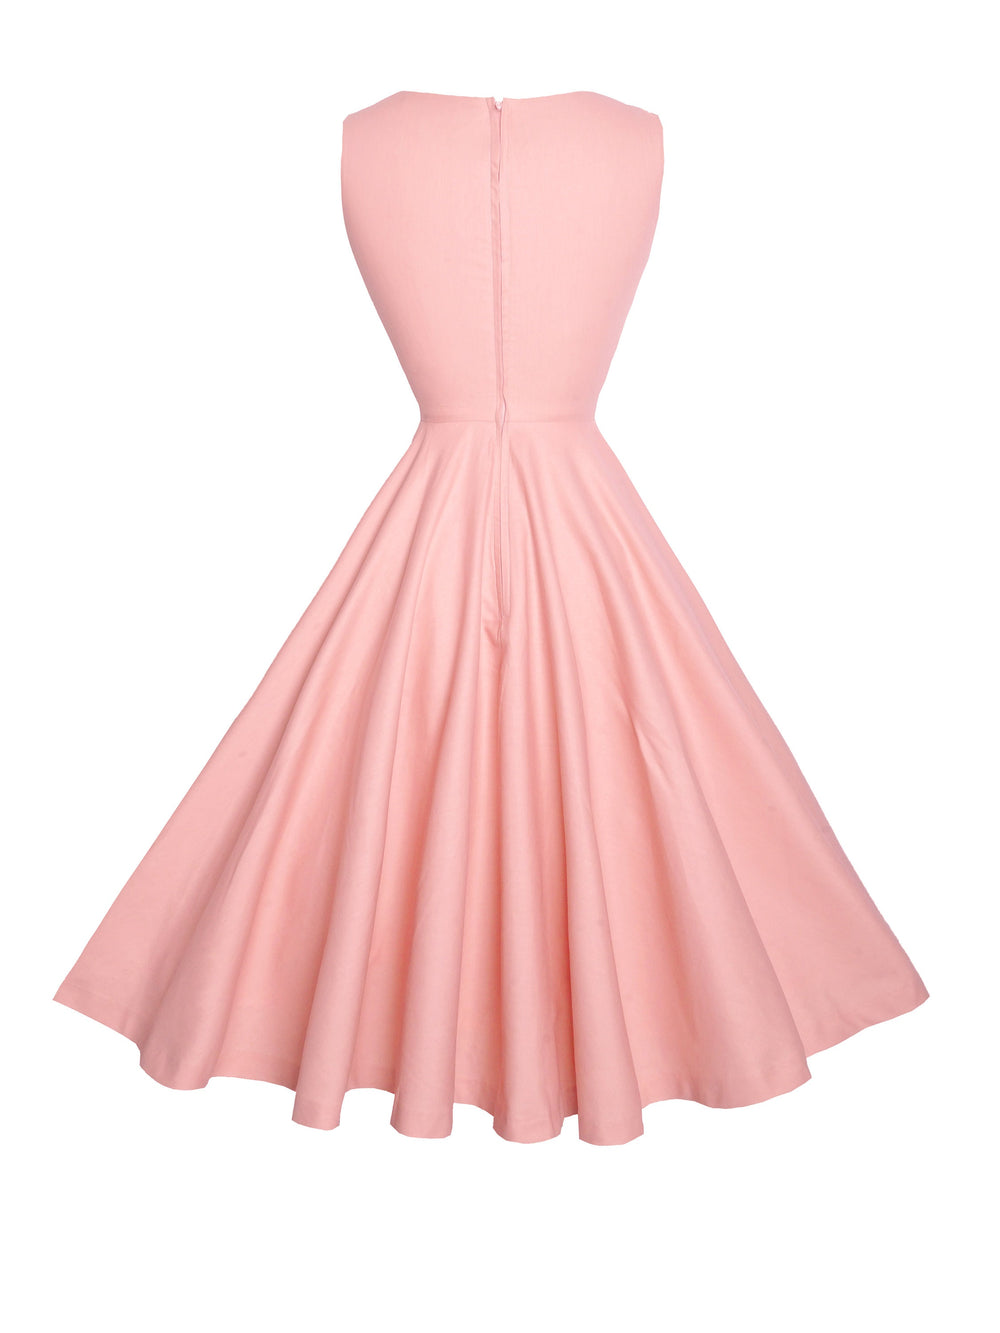 RTS - Size S - Norma Dress in Dusty Pink Cotton